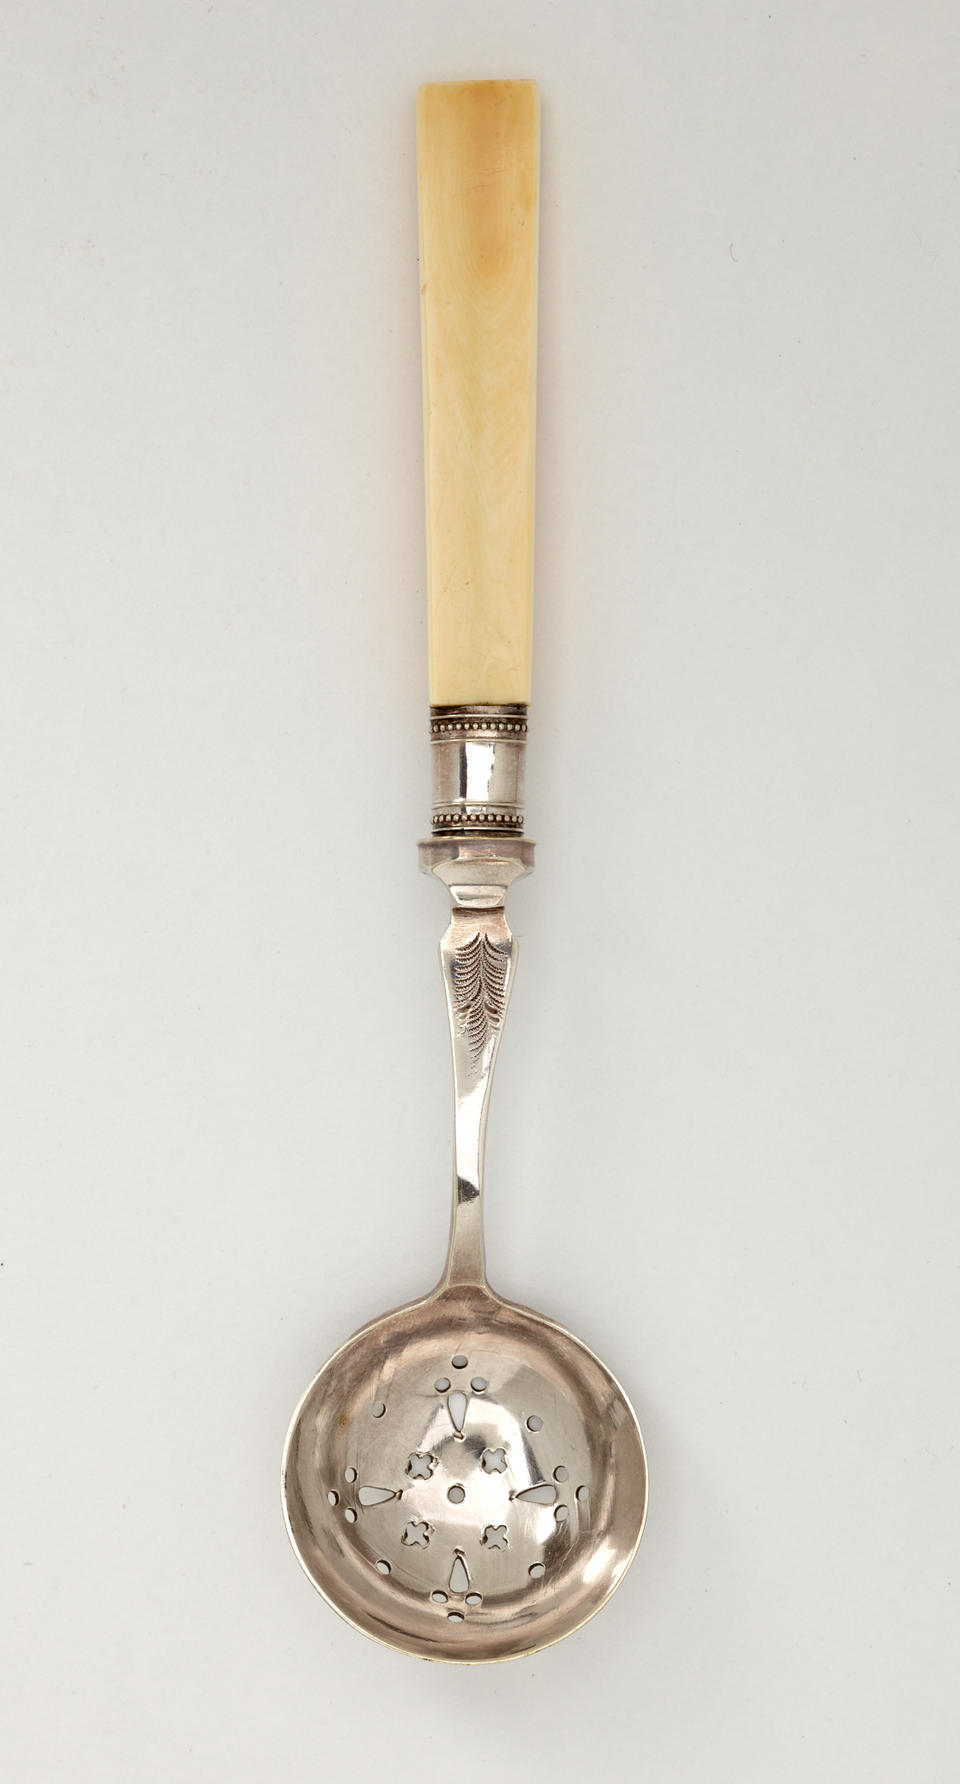 A silver sugar sifter with small cutouts in the bowl, the end of the handle is ivory. 